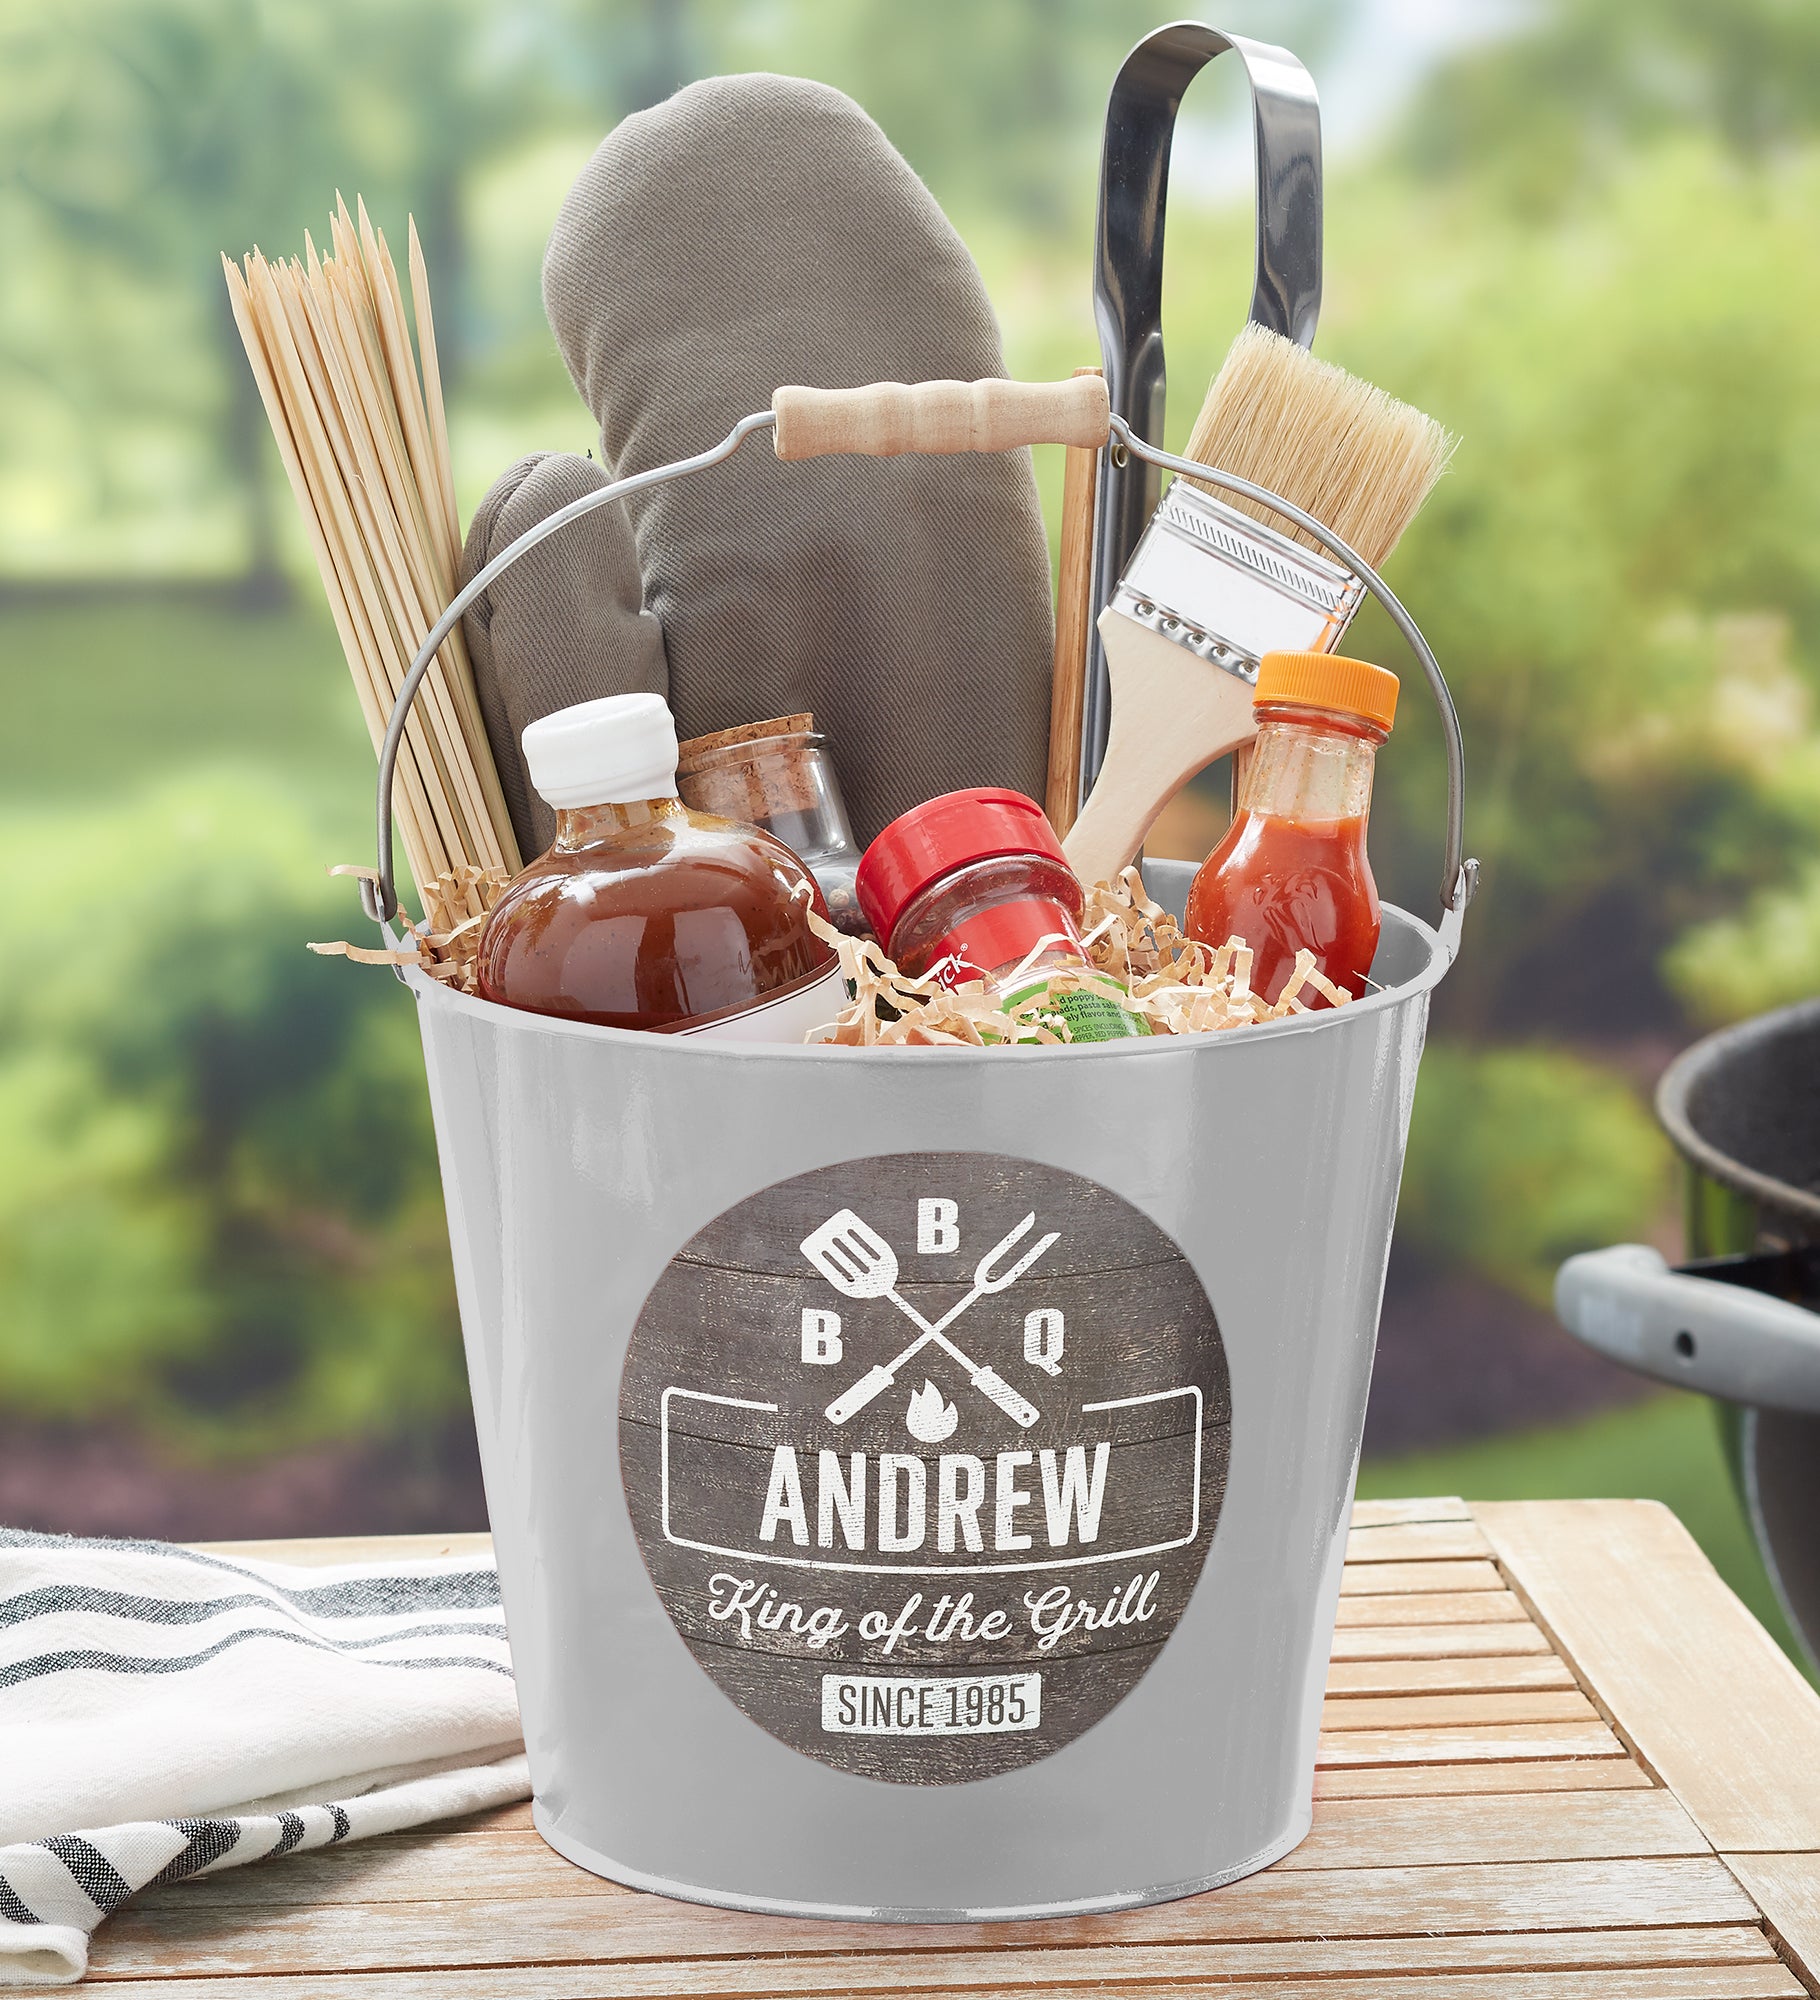 BBQ Time Personalized Metal Bucket